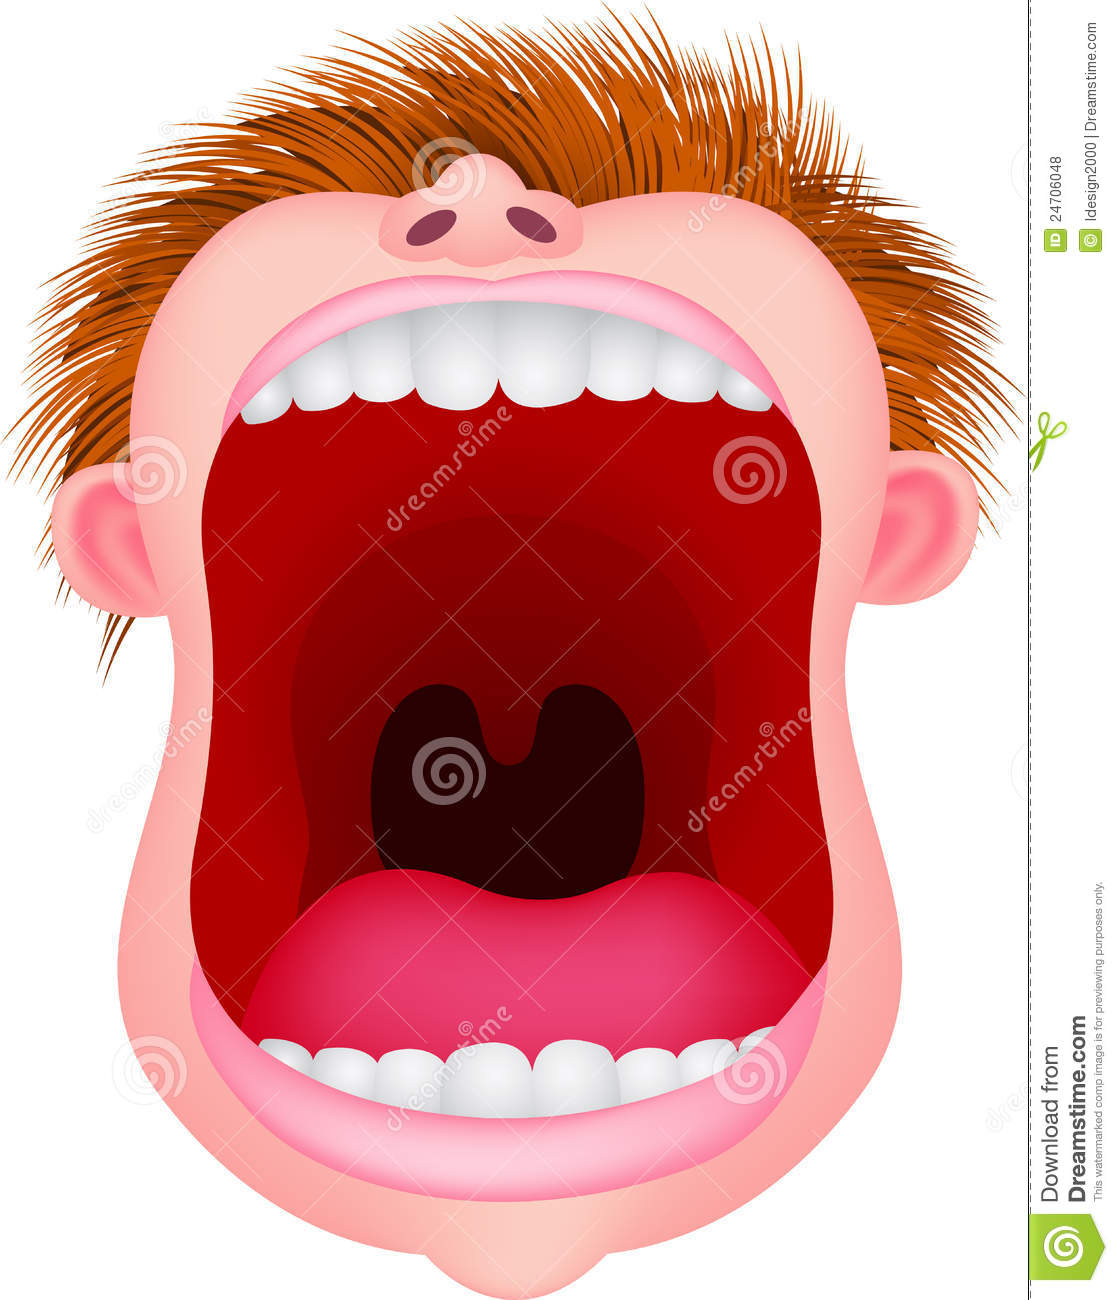 Royalty Free Stock Photos  Open Mouth  Image  24706048